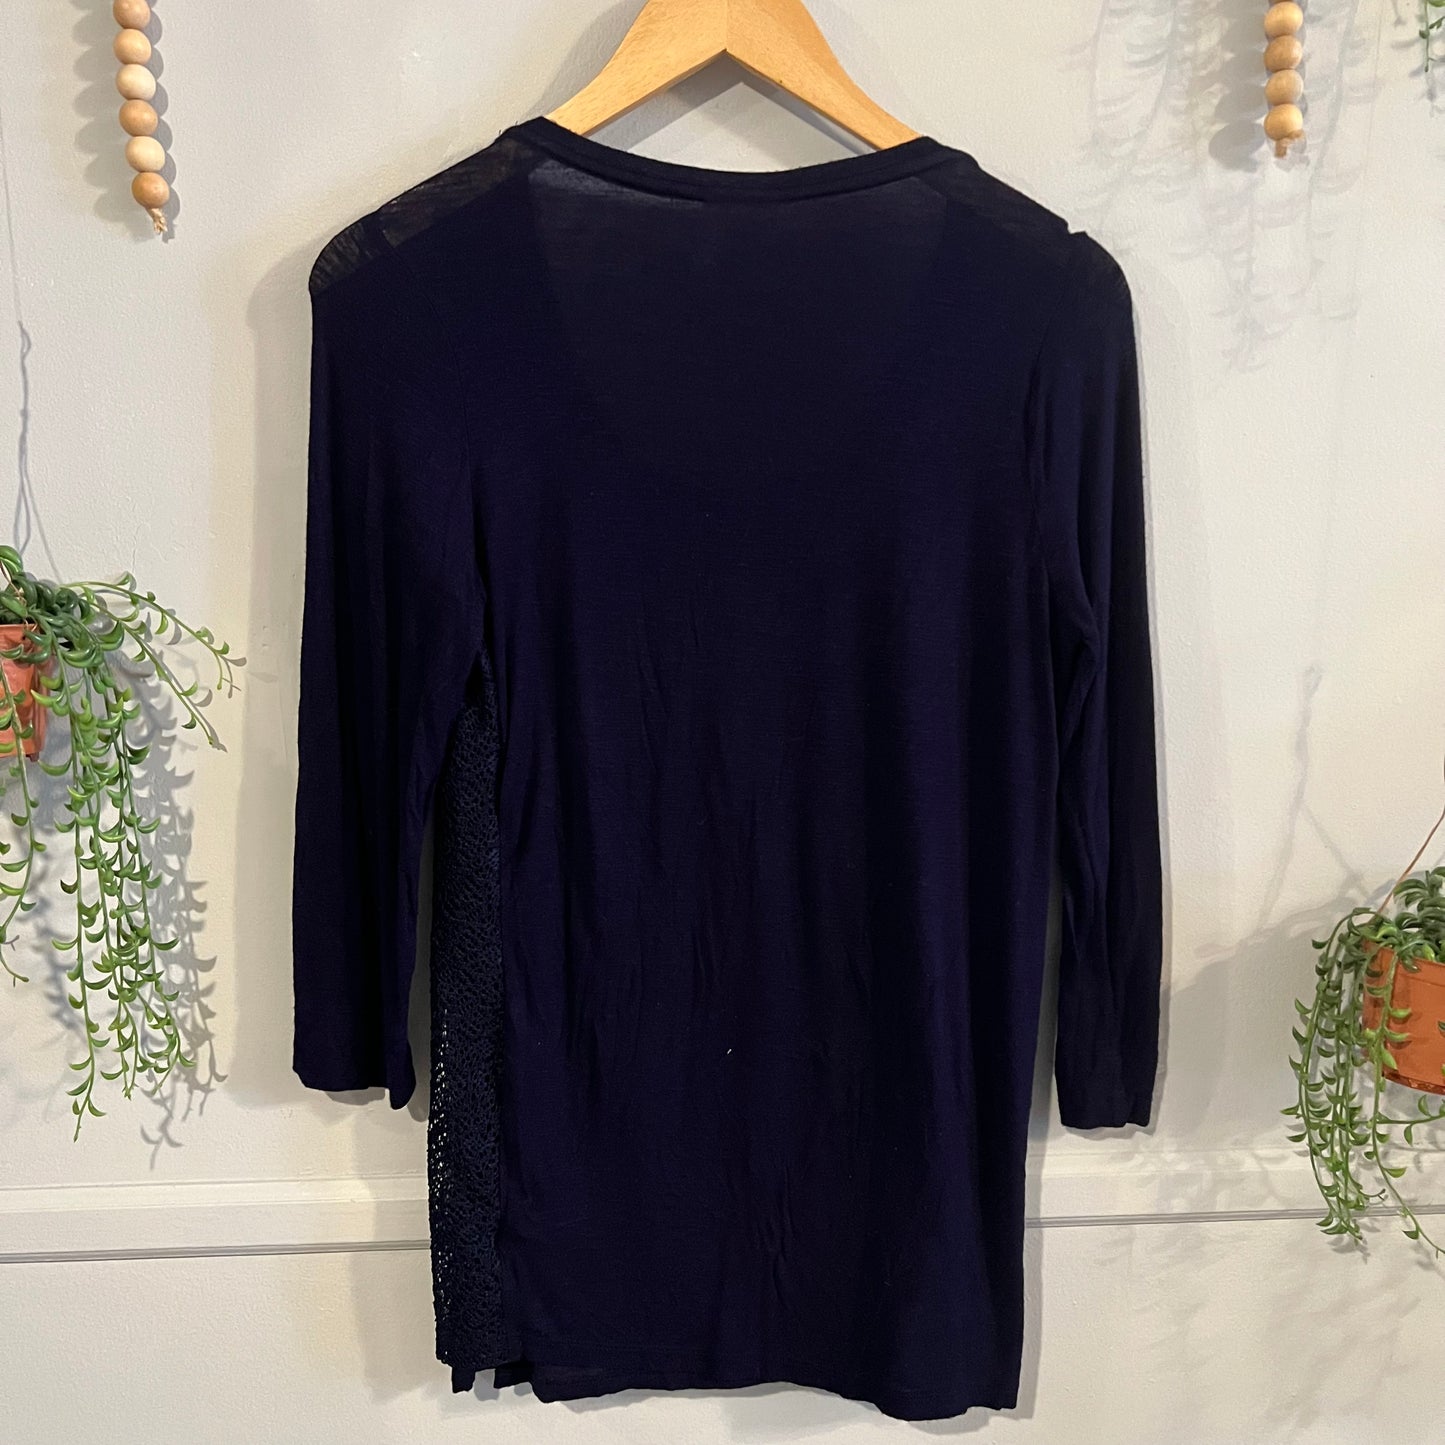 Crocheted round neck LS tee with pocket, Navy